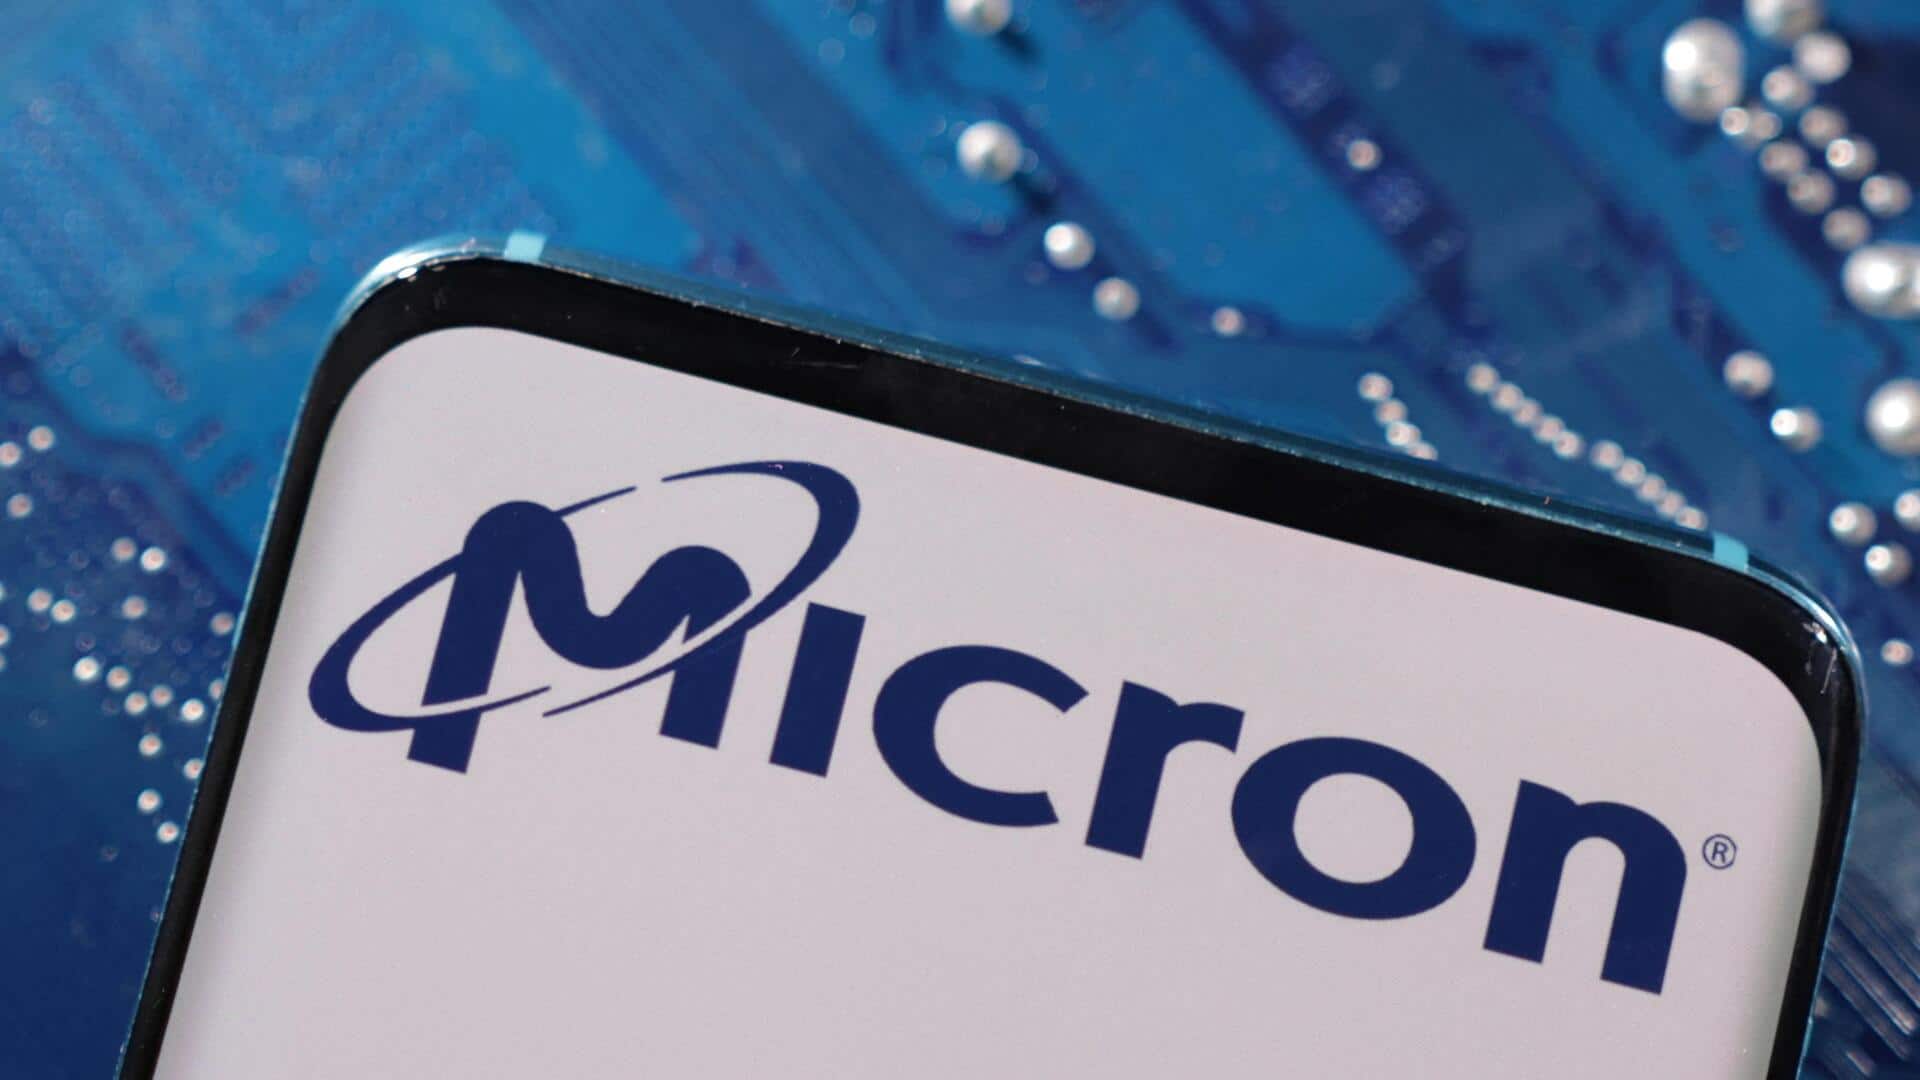 China welcomes Micron's expansion as ties with the US improve